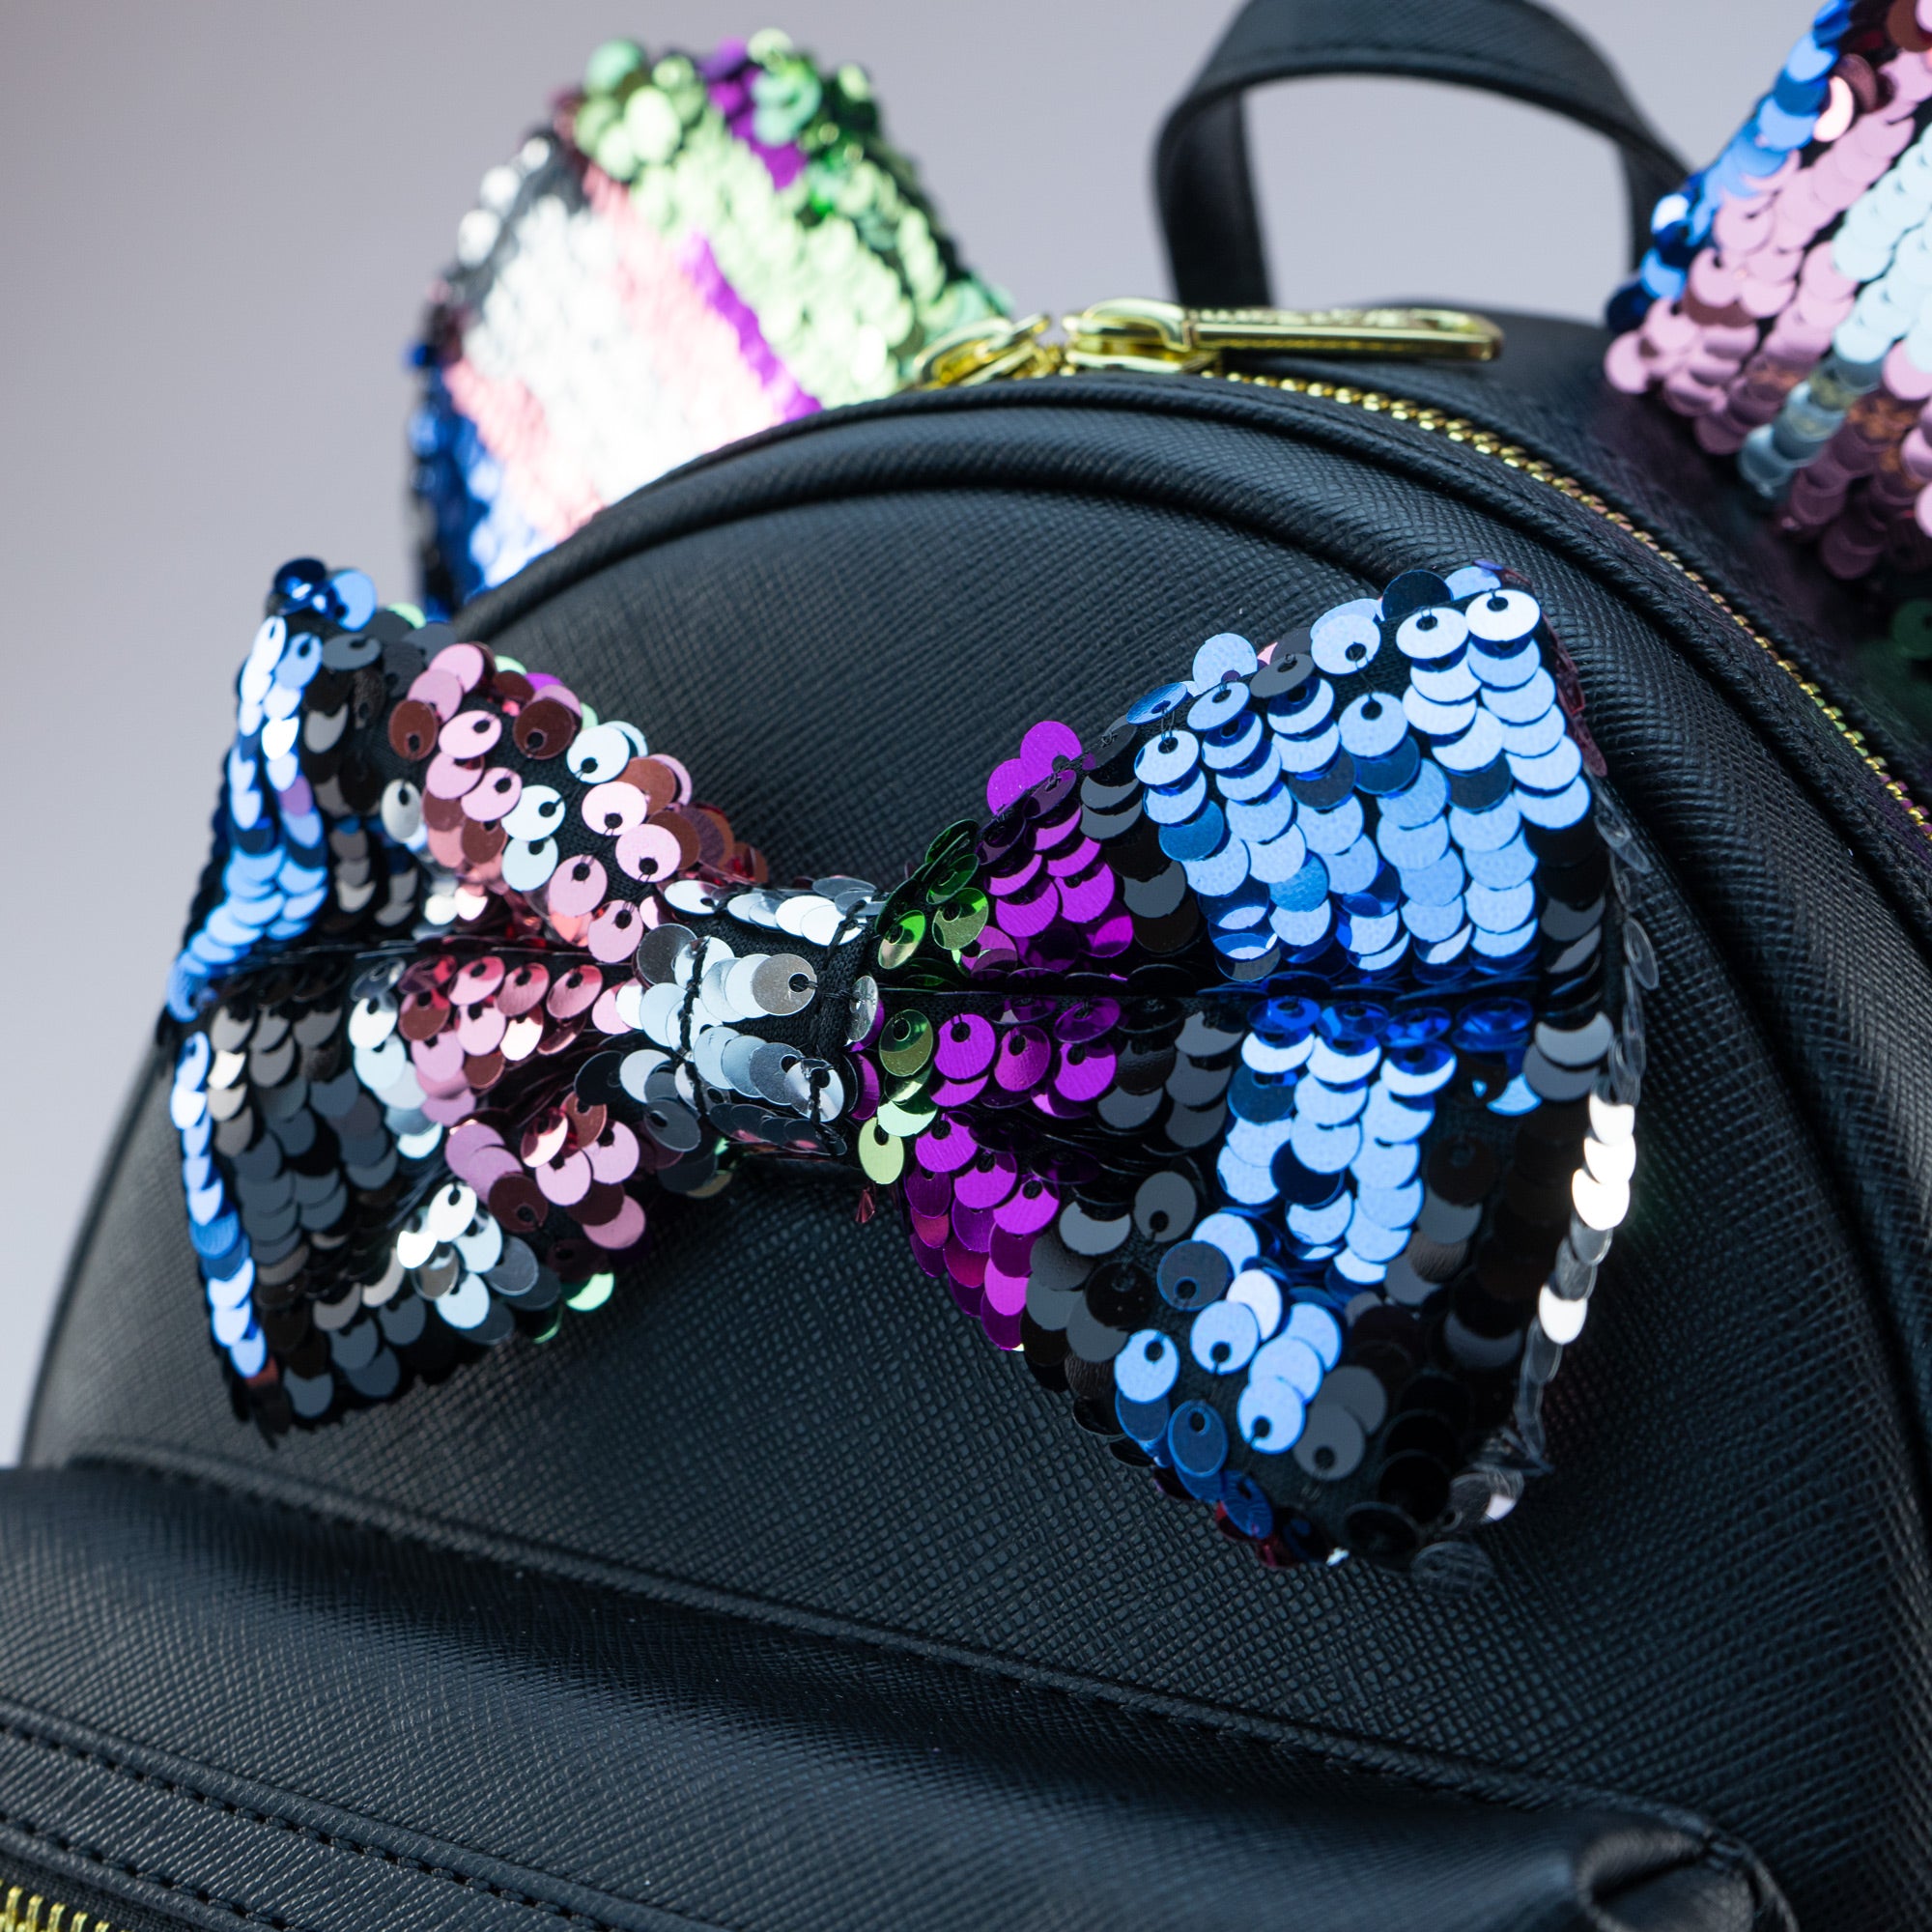 Loungefly x Disney Minnie Mouse Black Sequin Mini Backpack